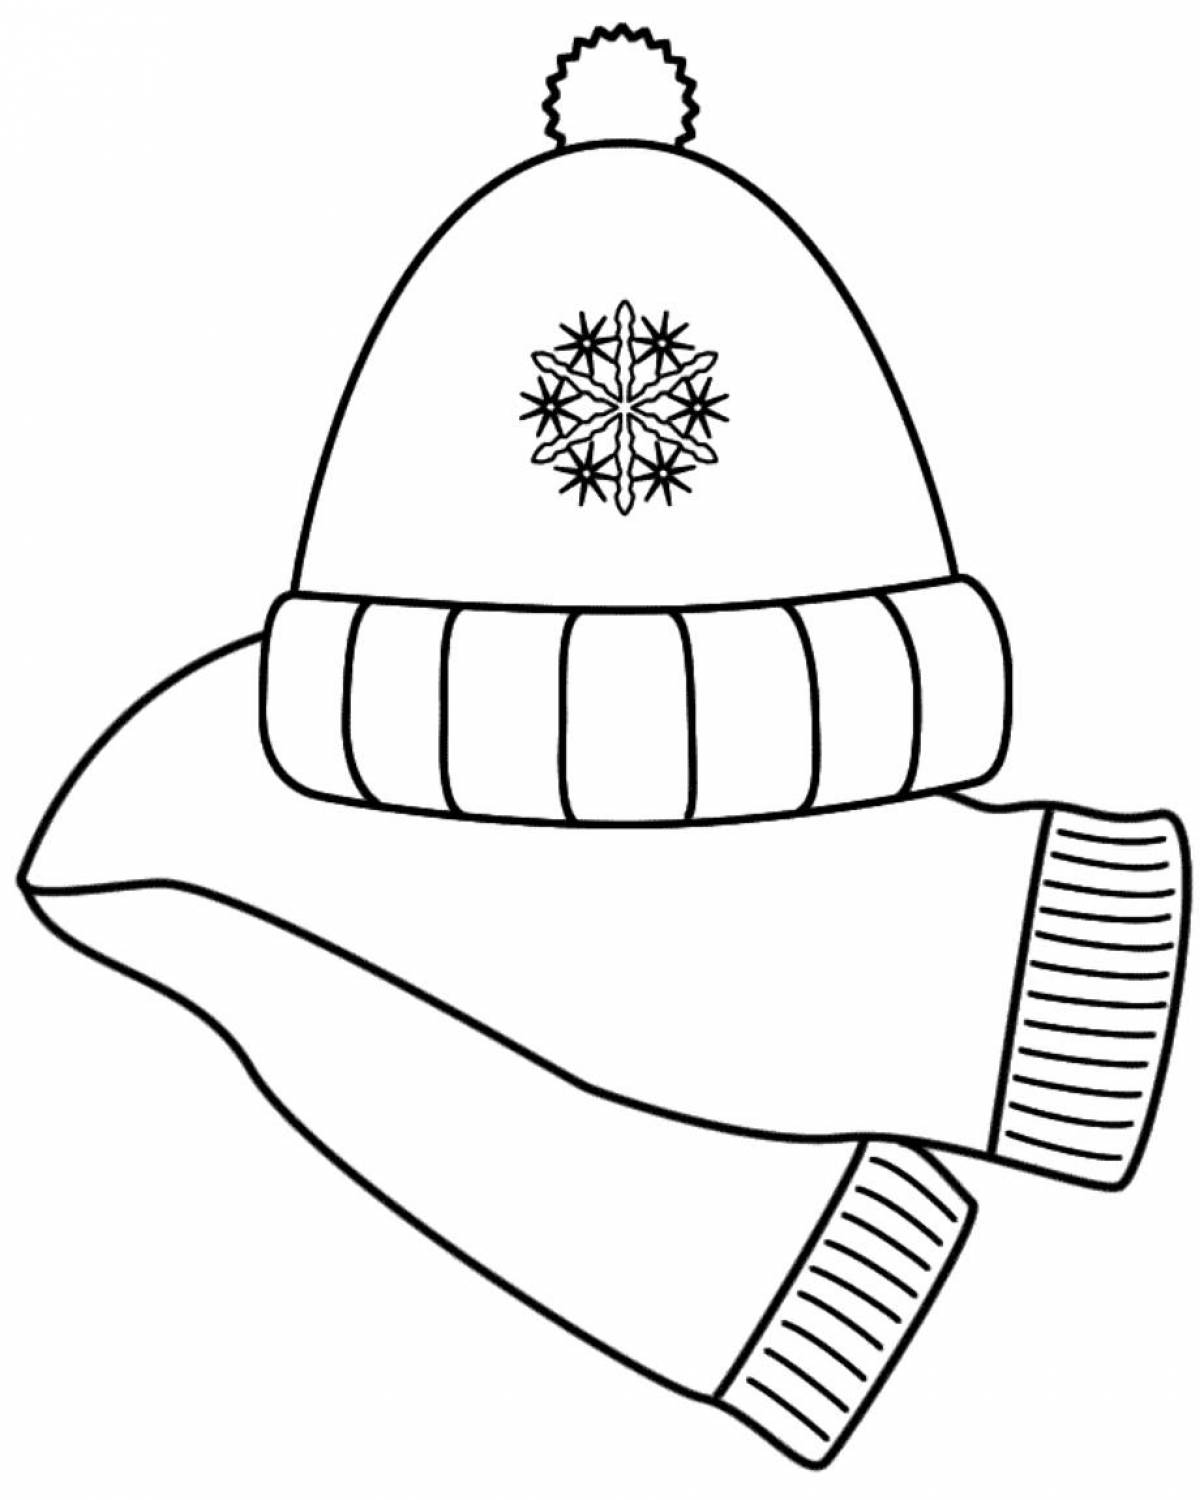 Radiant hat coloring page for kids